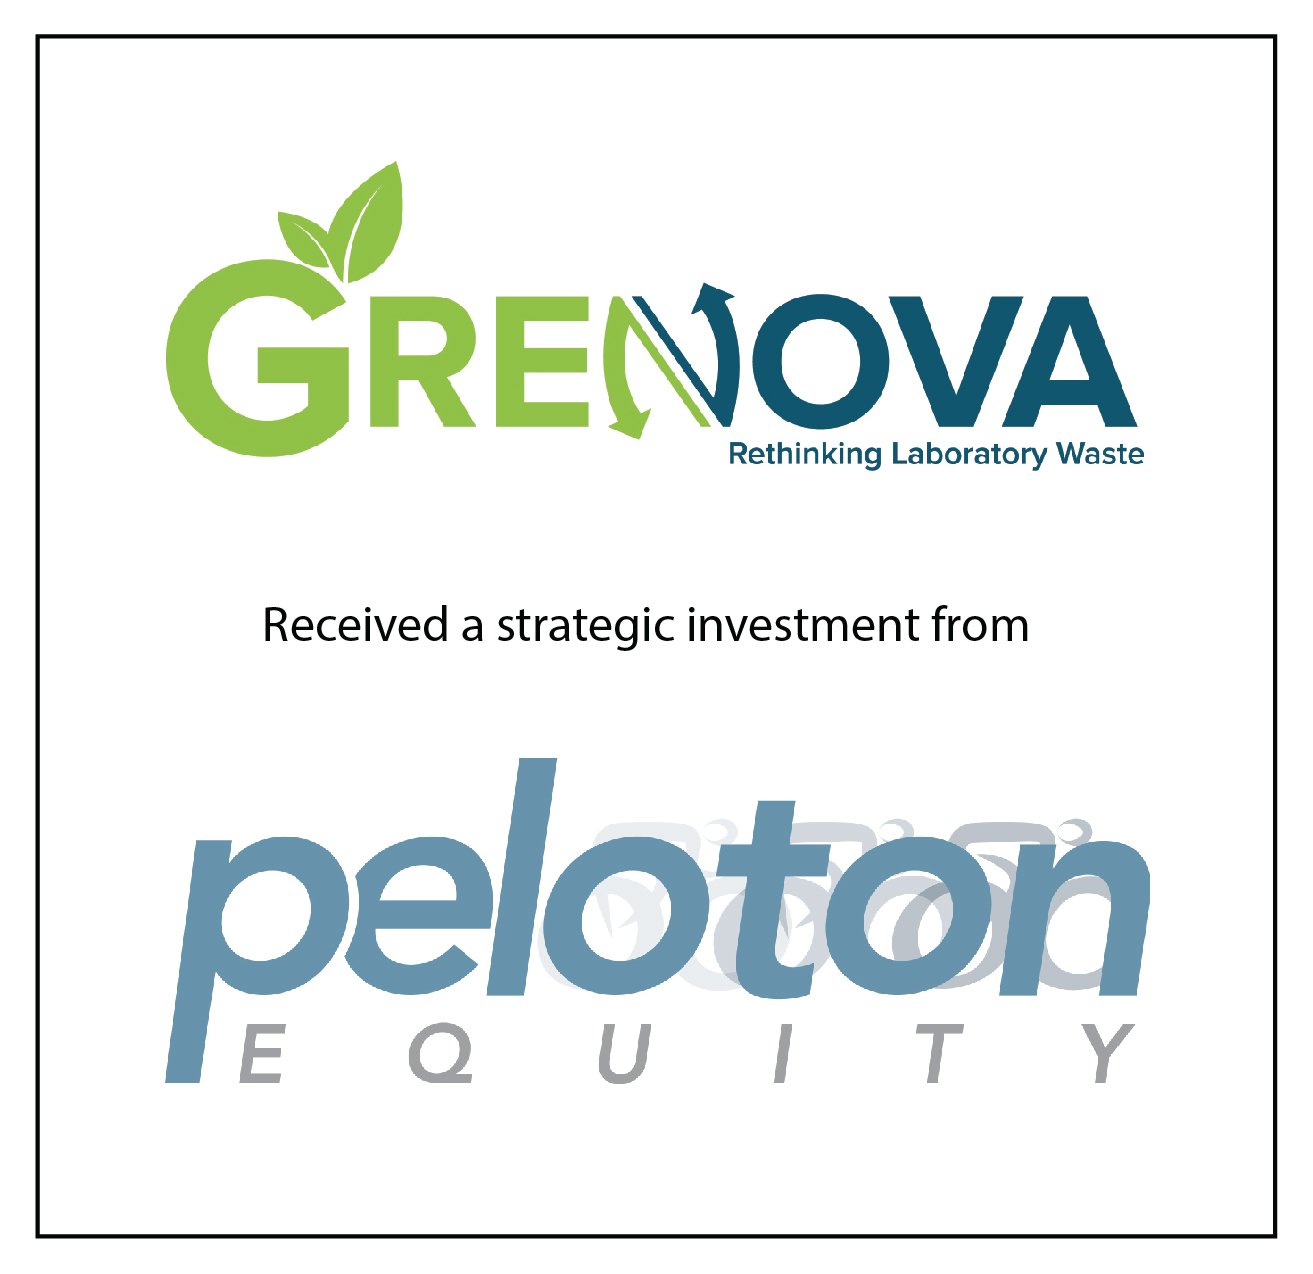 Grenova Completes Growth Recapitalization with Peloton Equity to Accelerate Strategic Objectives